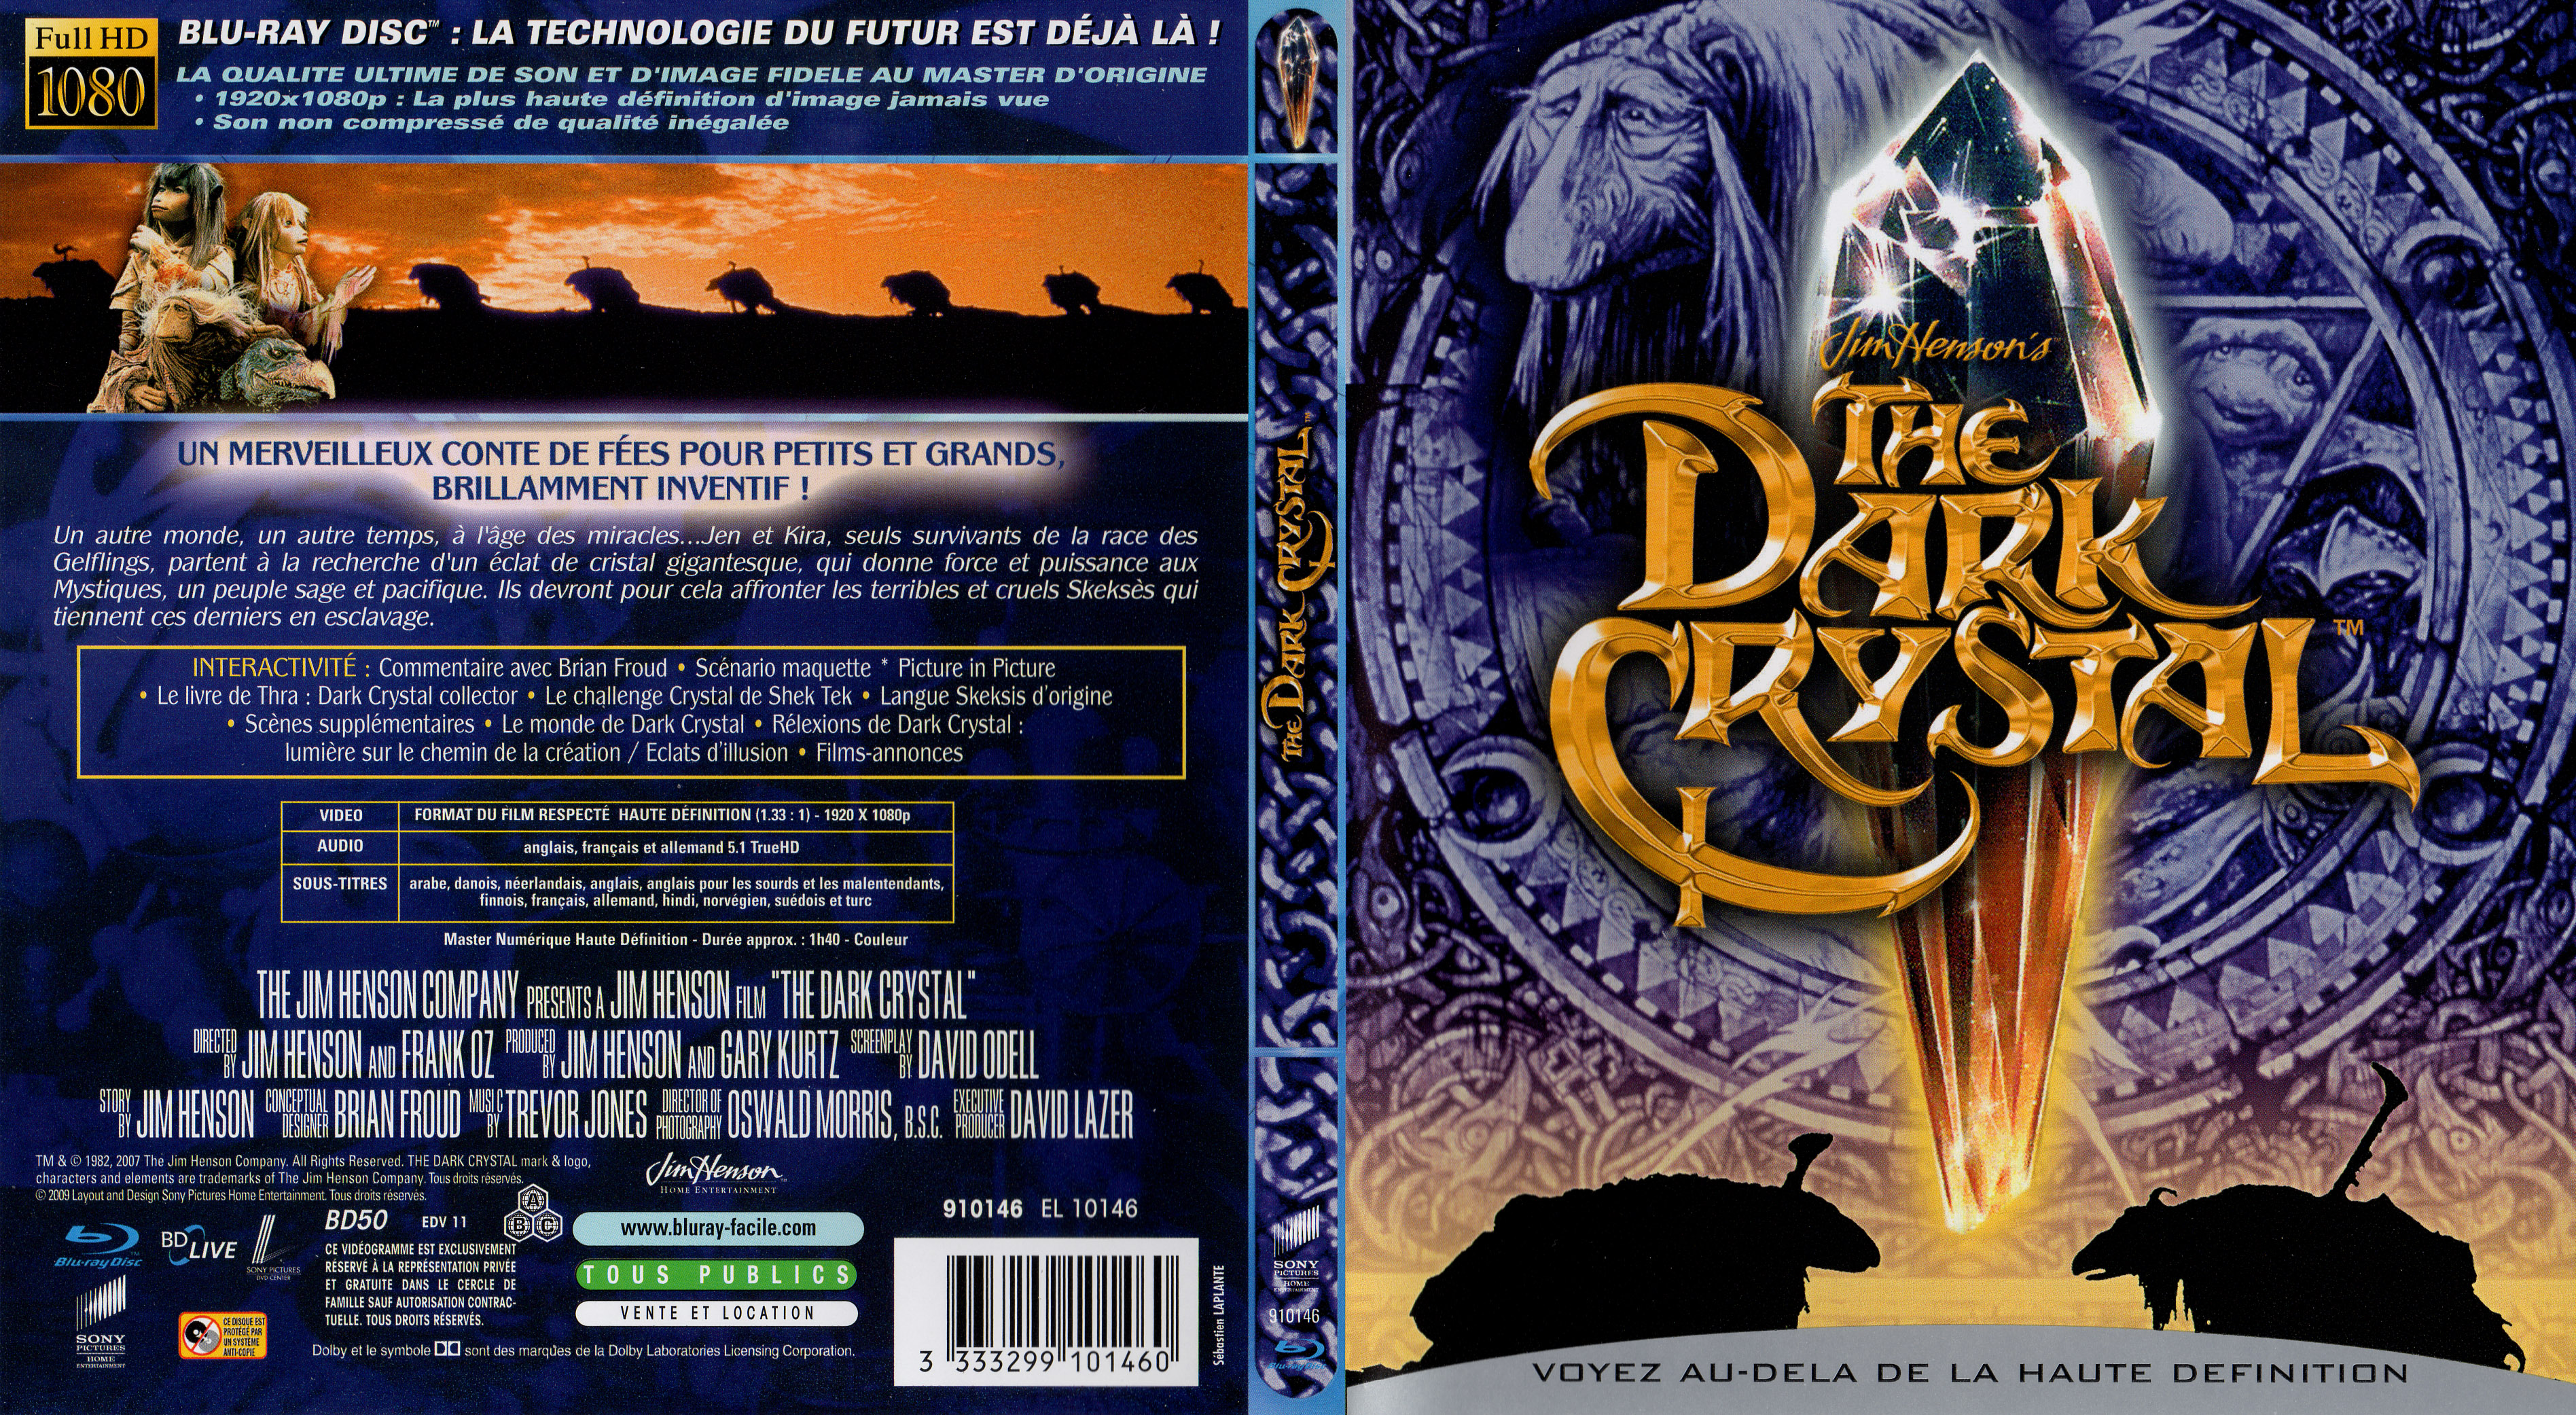 Jaquette DVD The dark crystal (BLU-RAY)